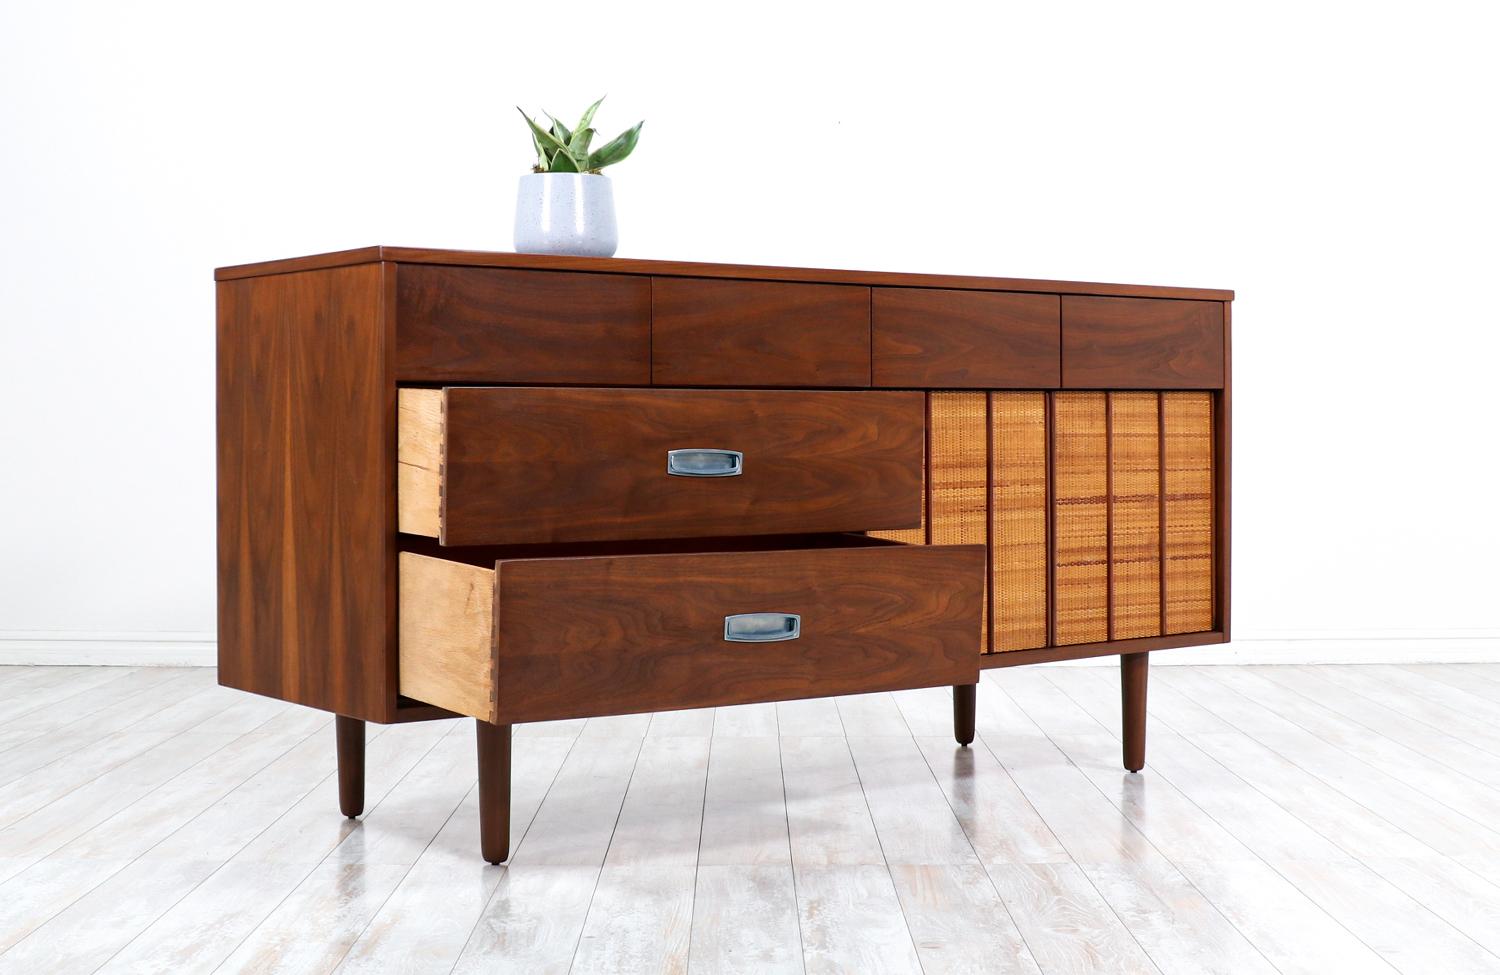 American Mid-Century Modern “Mainline” Dresser with Cane Doors by Hooker